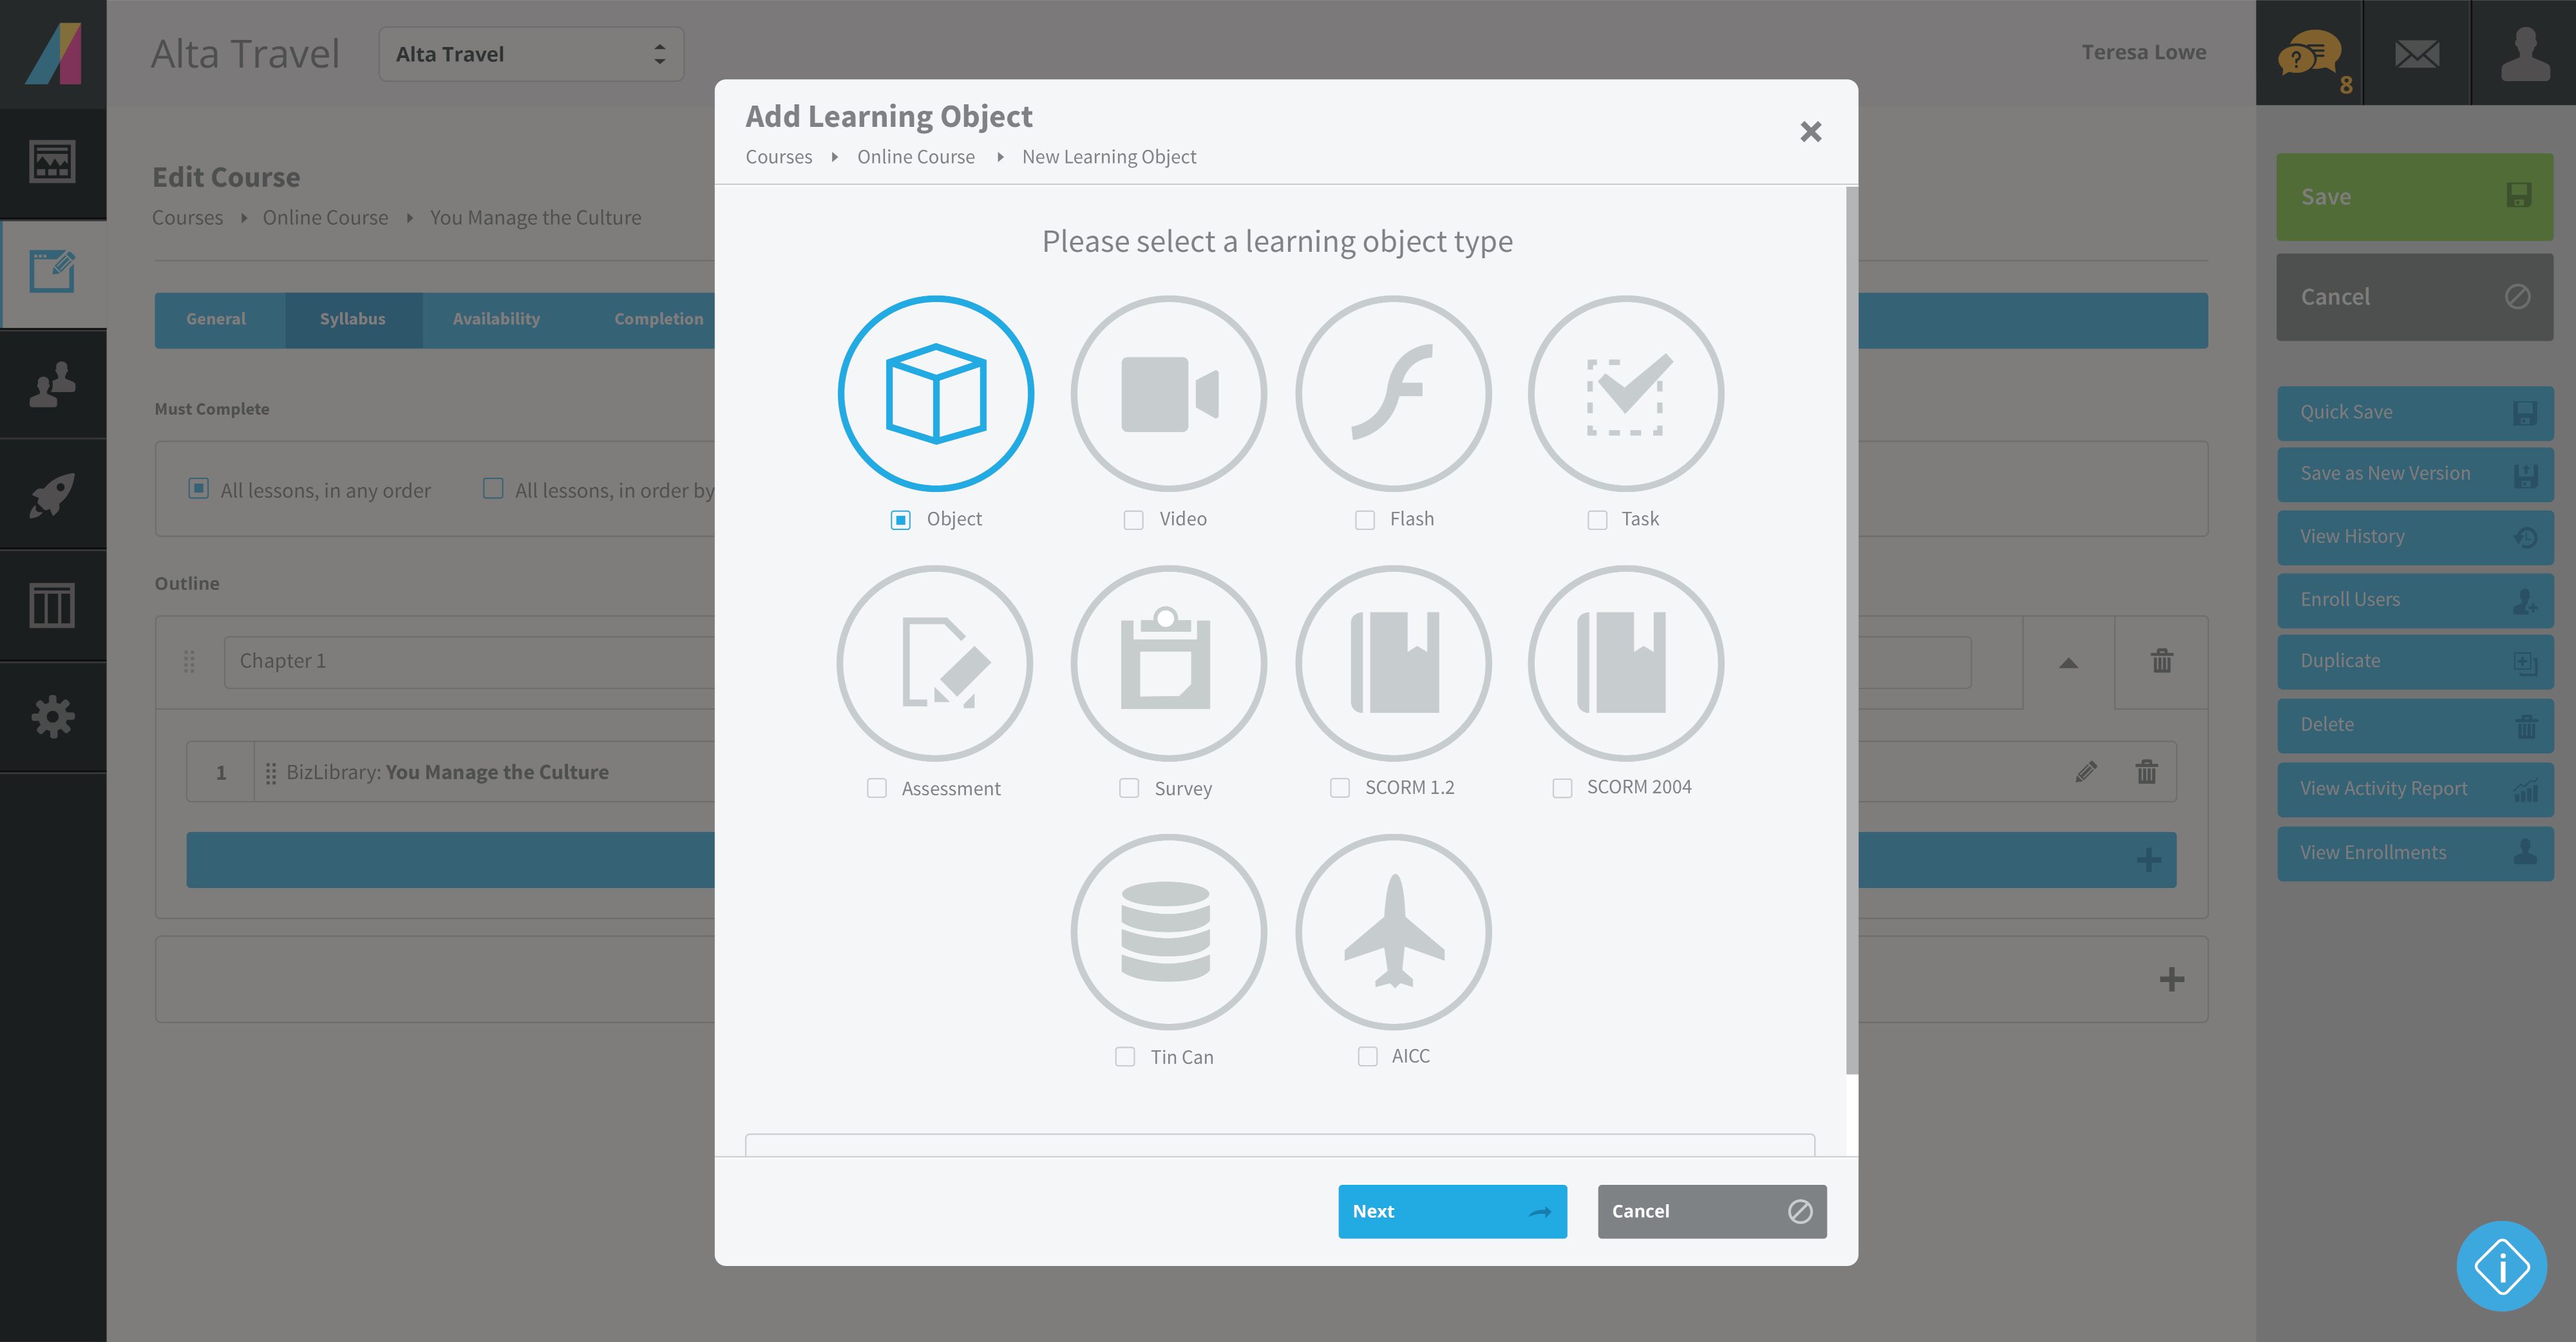 Absorb LMS - Add Learning Objects in Absorb LMS: A look at the different types of learning objects in Absorb LMS, including support for SCORM, Tin Can, and AICC.